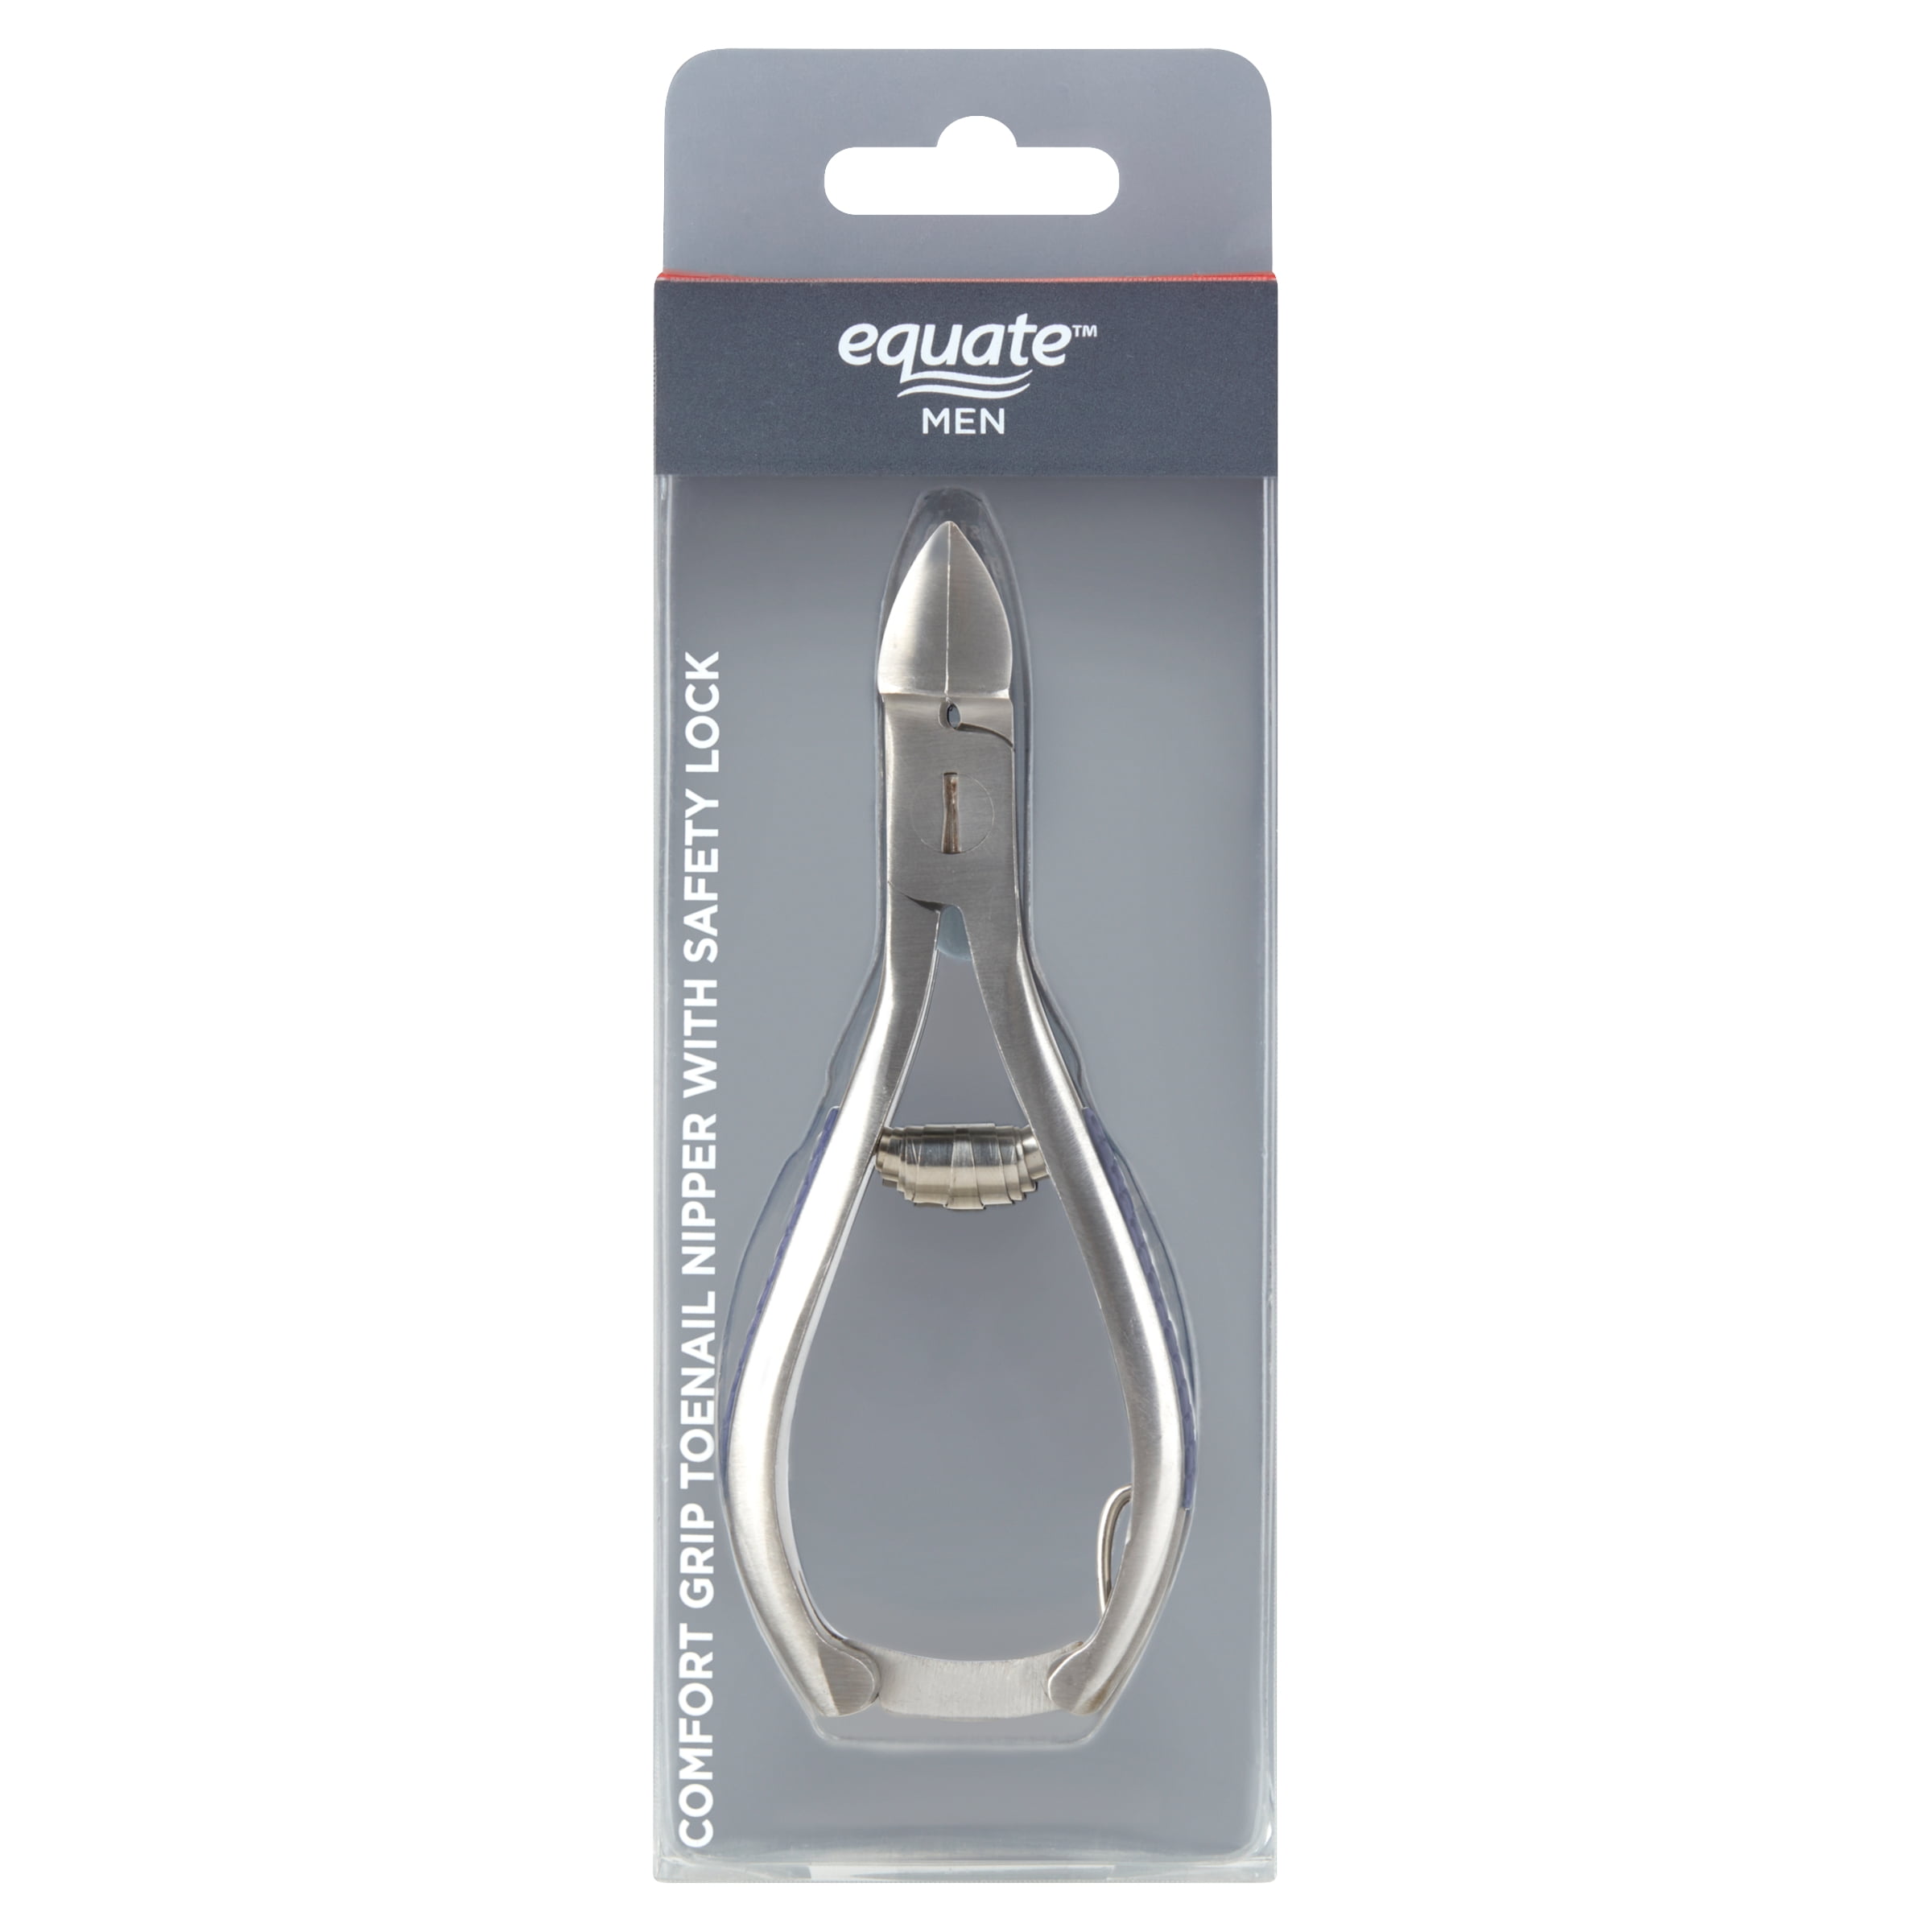 Comfort Hold Nail Clippers Non-Slip Ribbed Cushion Sure Grip Clipping –  Alazco